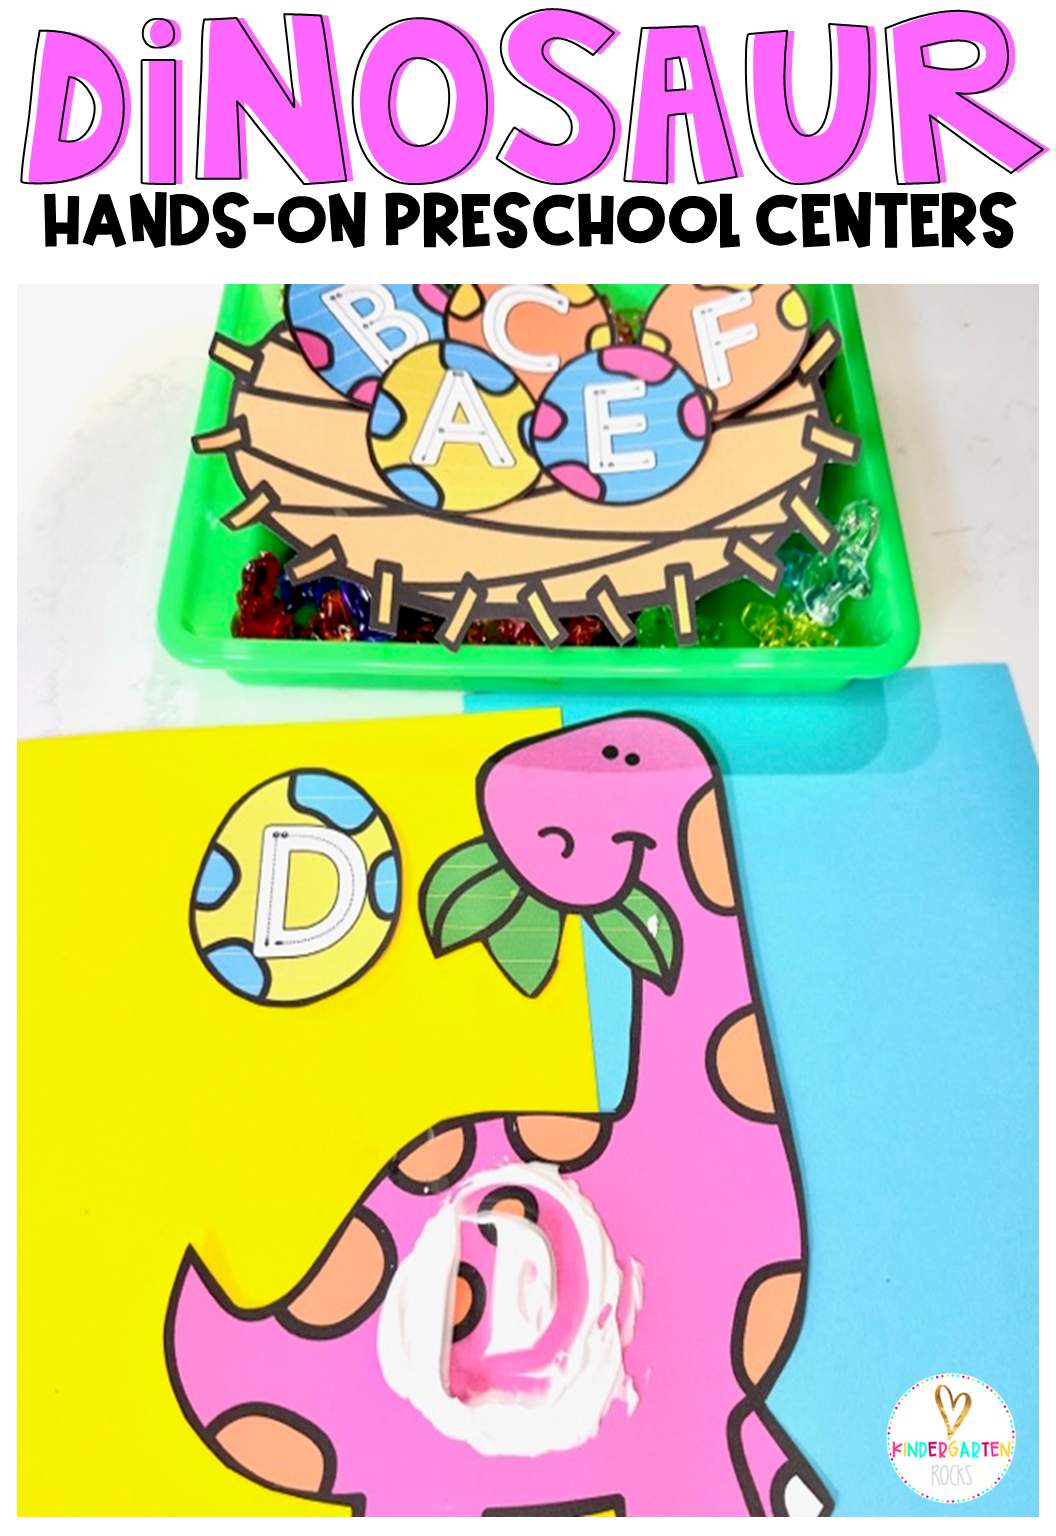 Are you looking for dinosaurs math and literacy centers for your preschool classroom? Then you will love our Dinosaur Centers and Morning Bins for the winter months of pre-k.